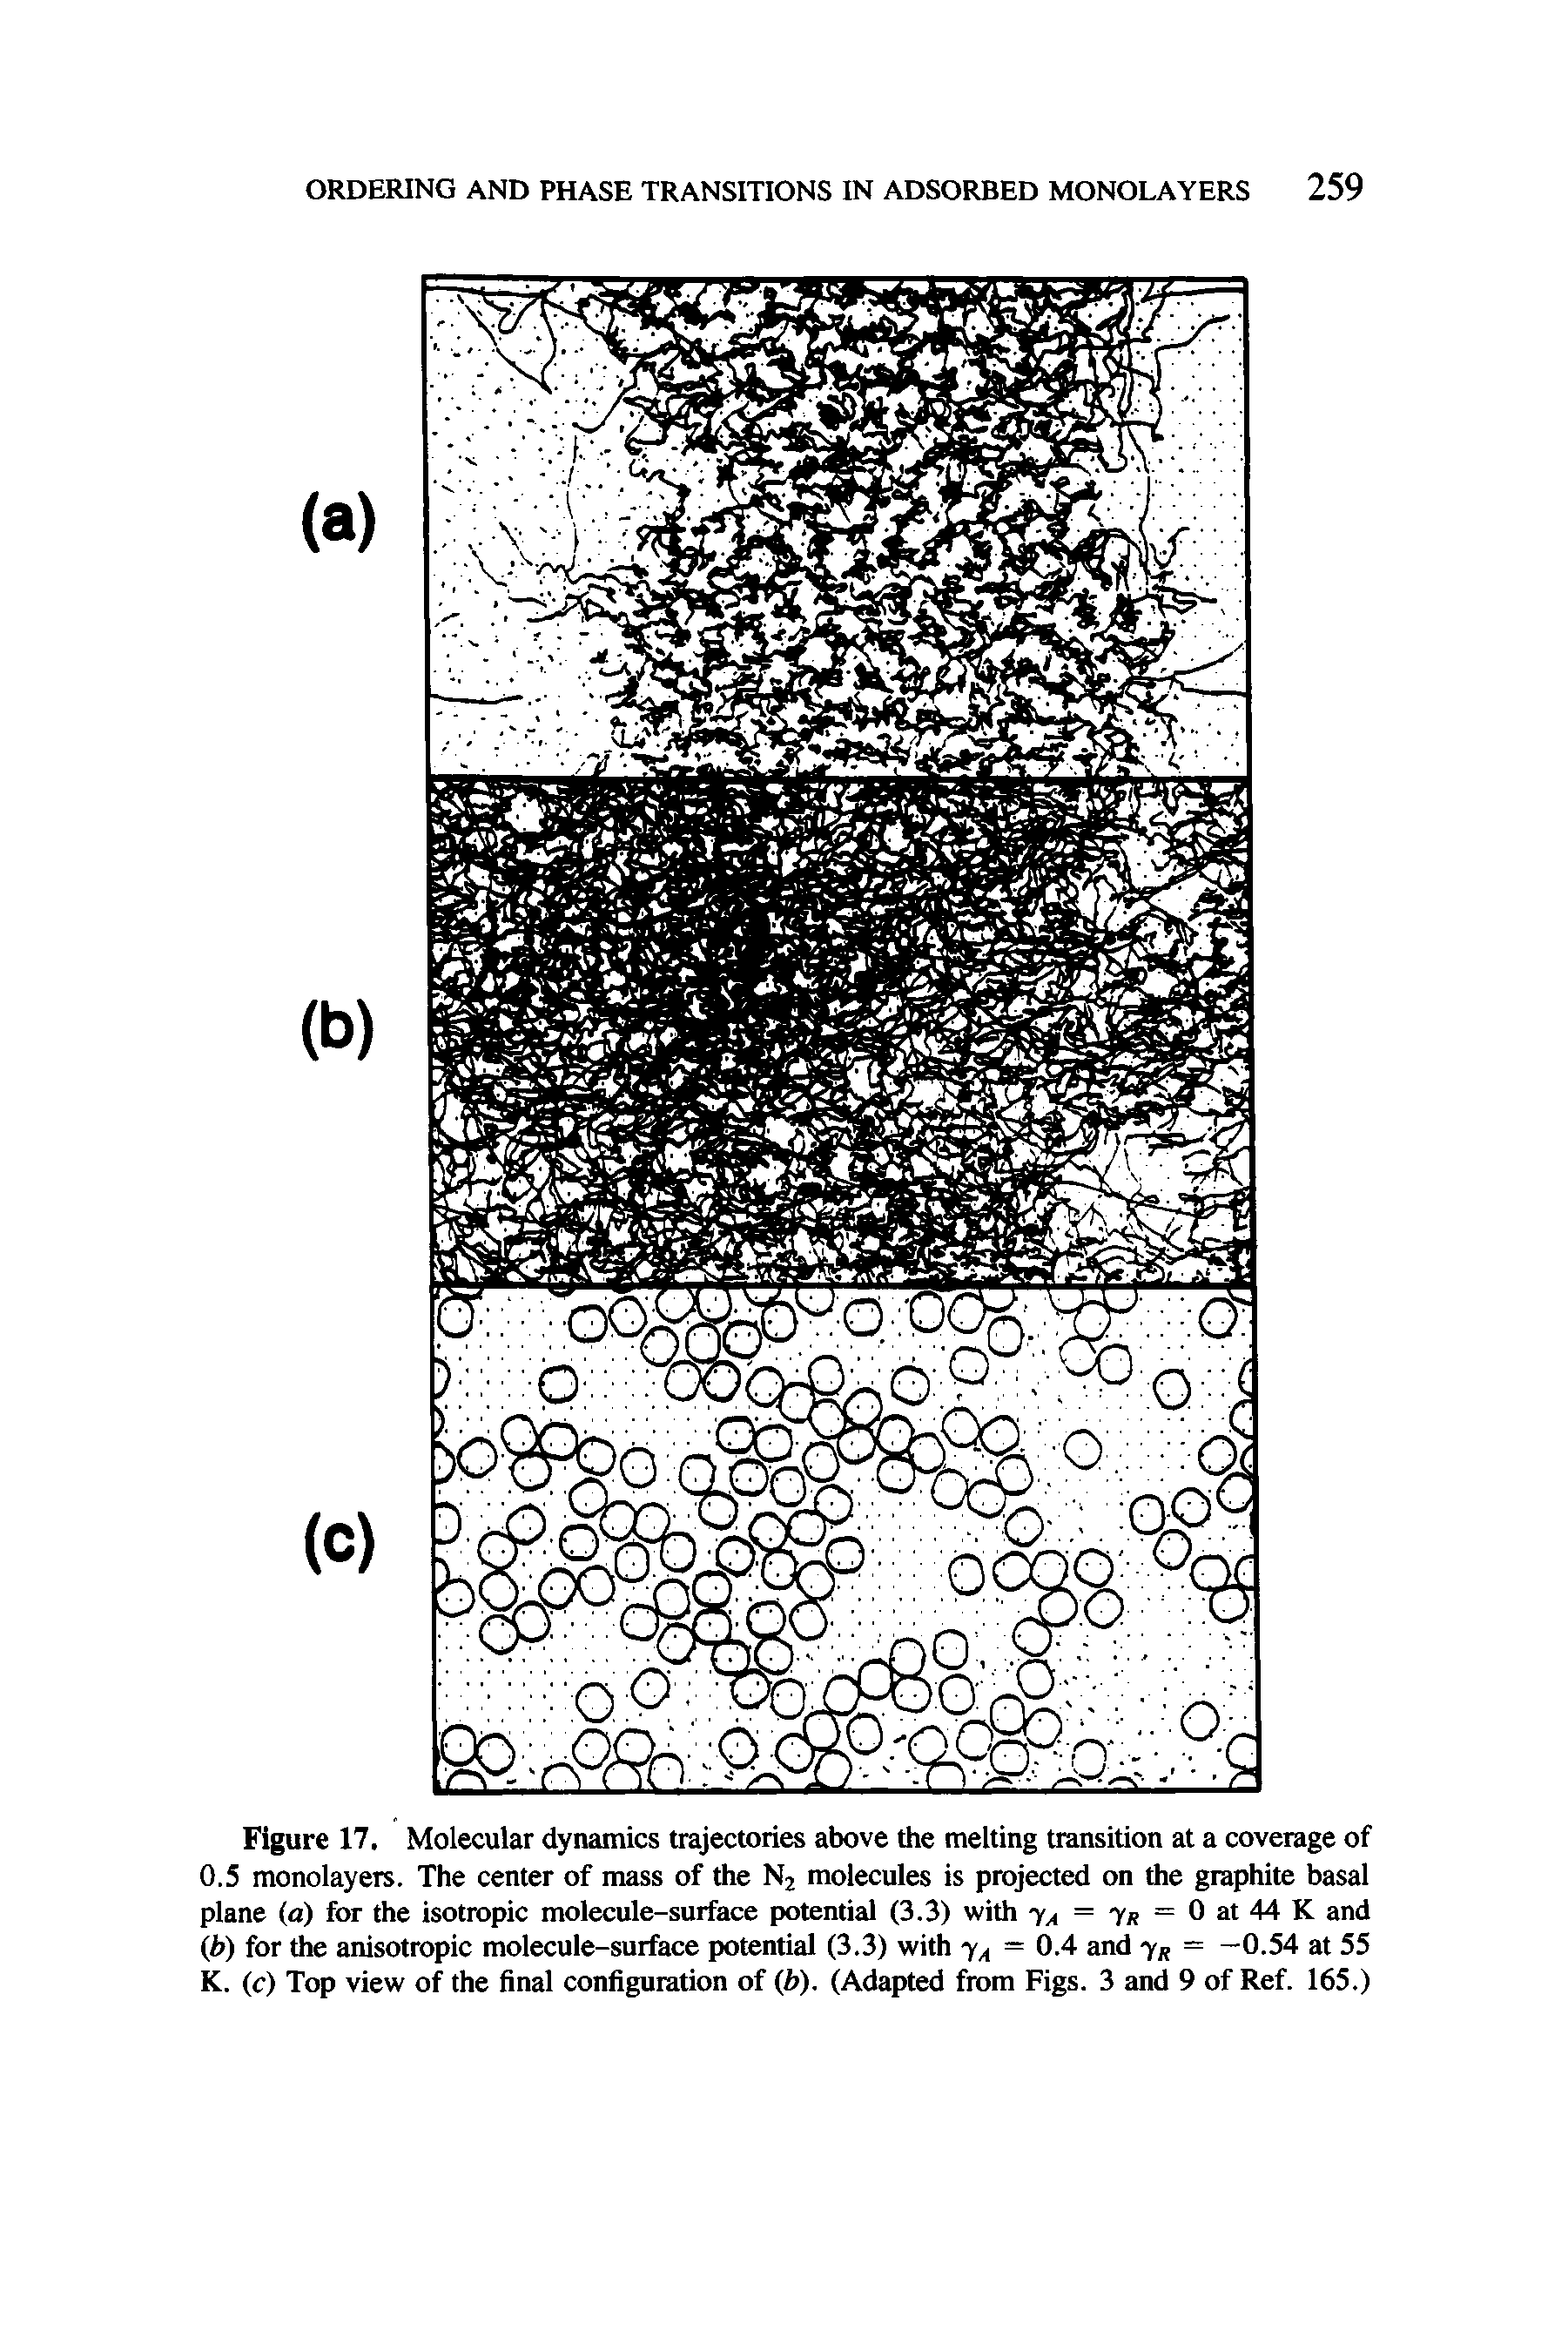 Figure 17. Molecular dynamics trajectories above the melting transition at a coverage of 0.5 monolayers. The center of mass of the N2 molecules is projected on the graphite basal plane (a) for the isotropic molecule-surface potential (3.3) with 7 = 7 = 0 at 44 K and (b) for the anisotropic molecule-surface potential (3.3) with = 0.4 and y — —0.54 at 55 K. (c) Top view of the final configuration of (Z>). (Adapted from Figs. 3 and 9 of Ref. 165.)...